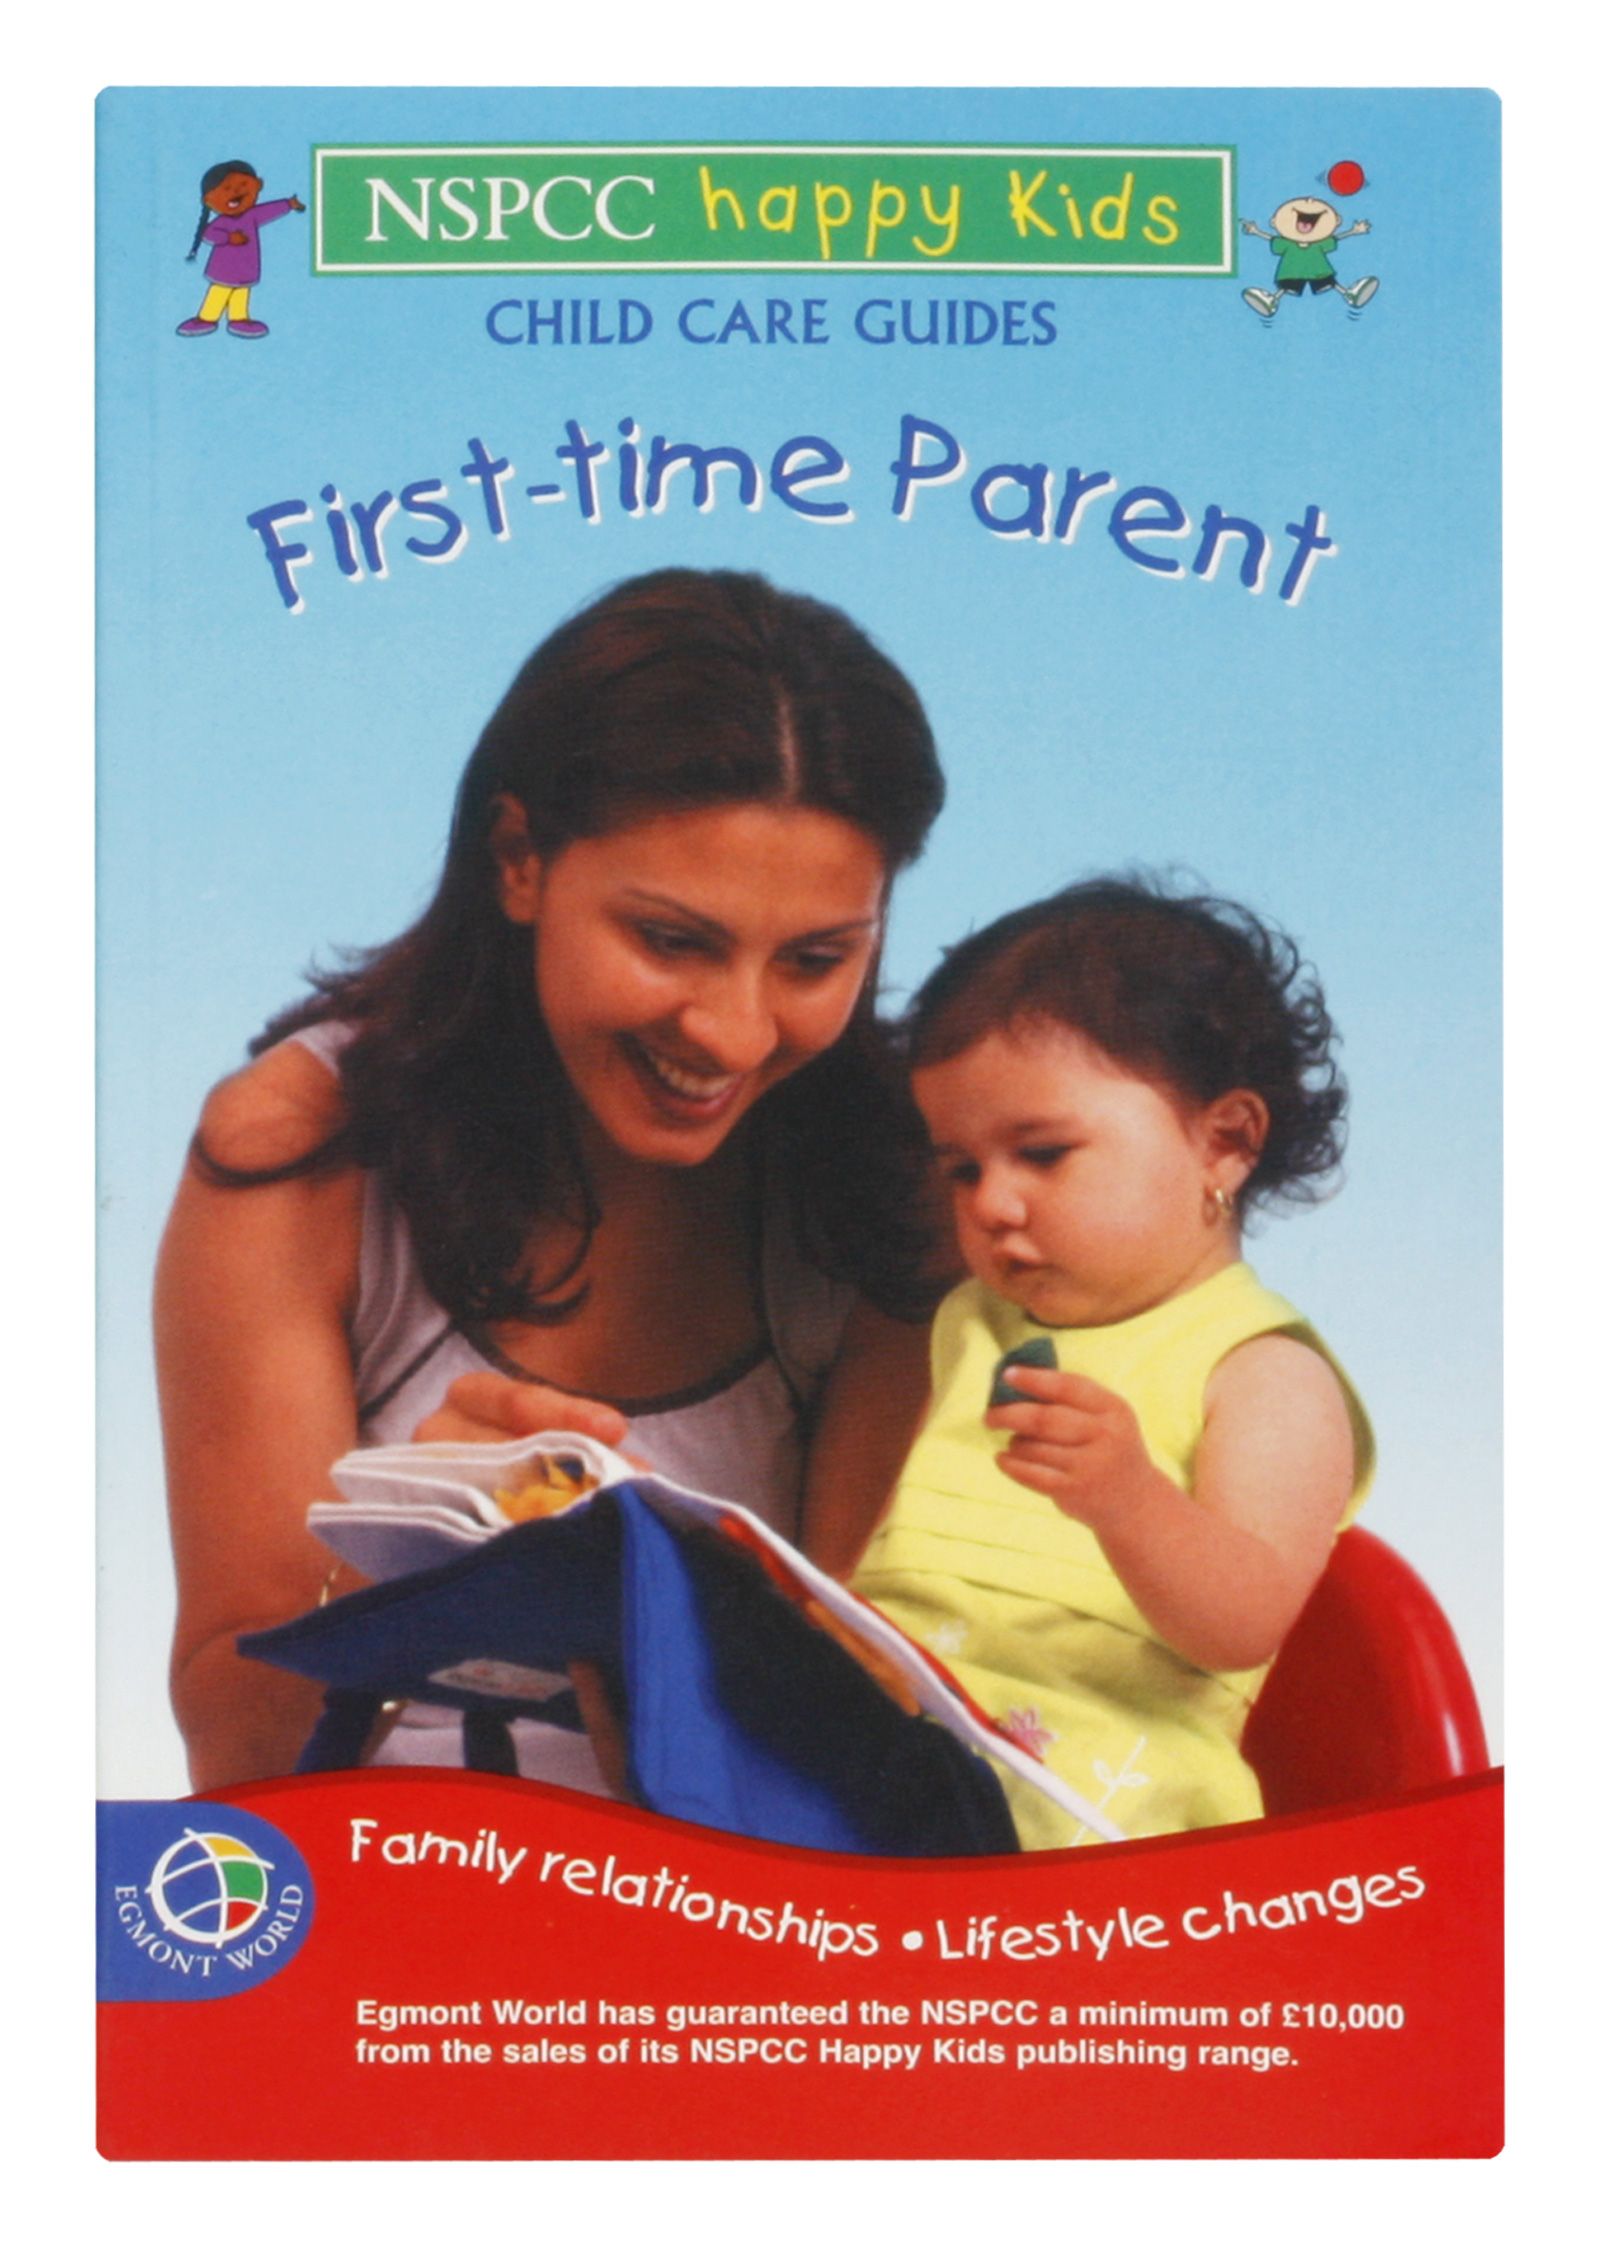 Happy kids - Child Care Guides First-time Parent